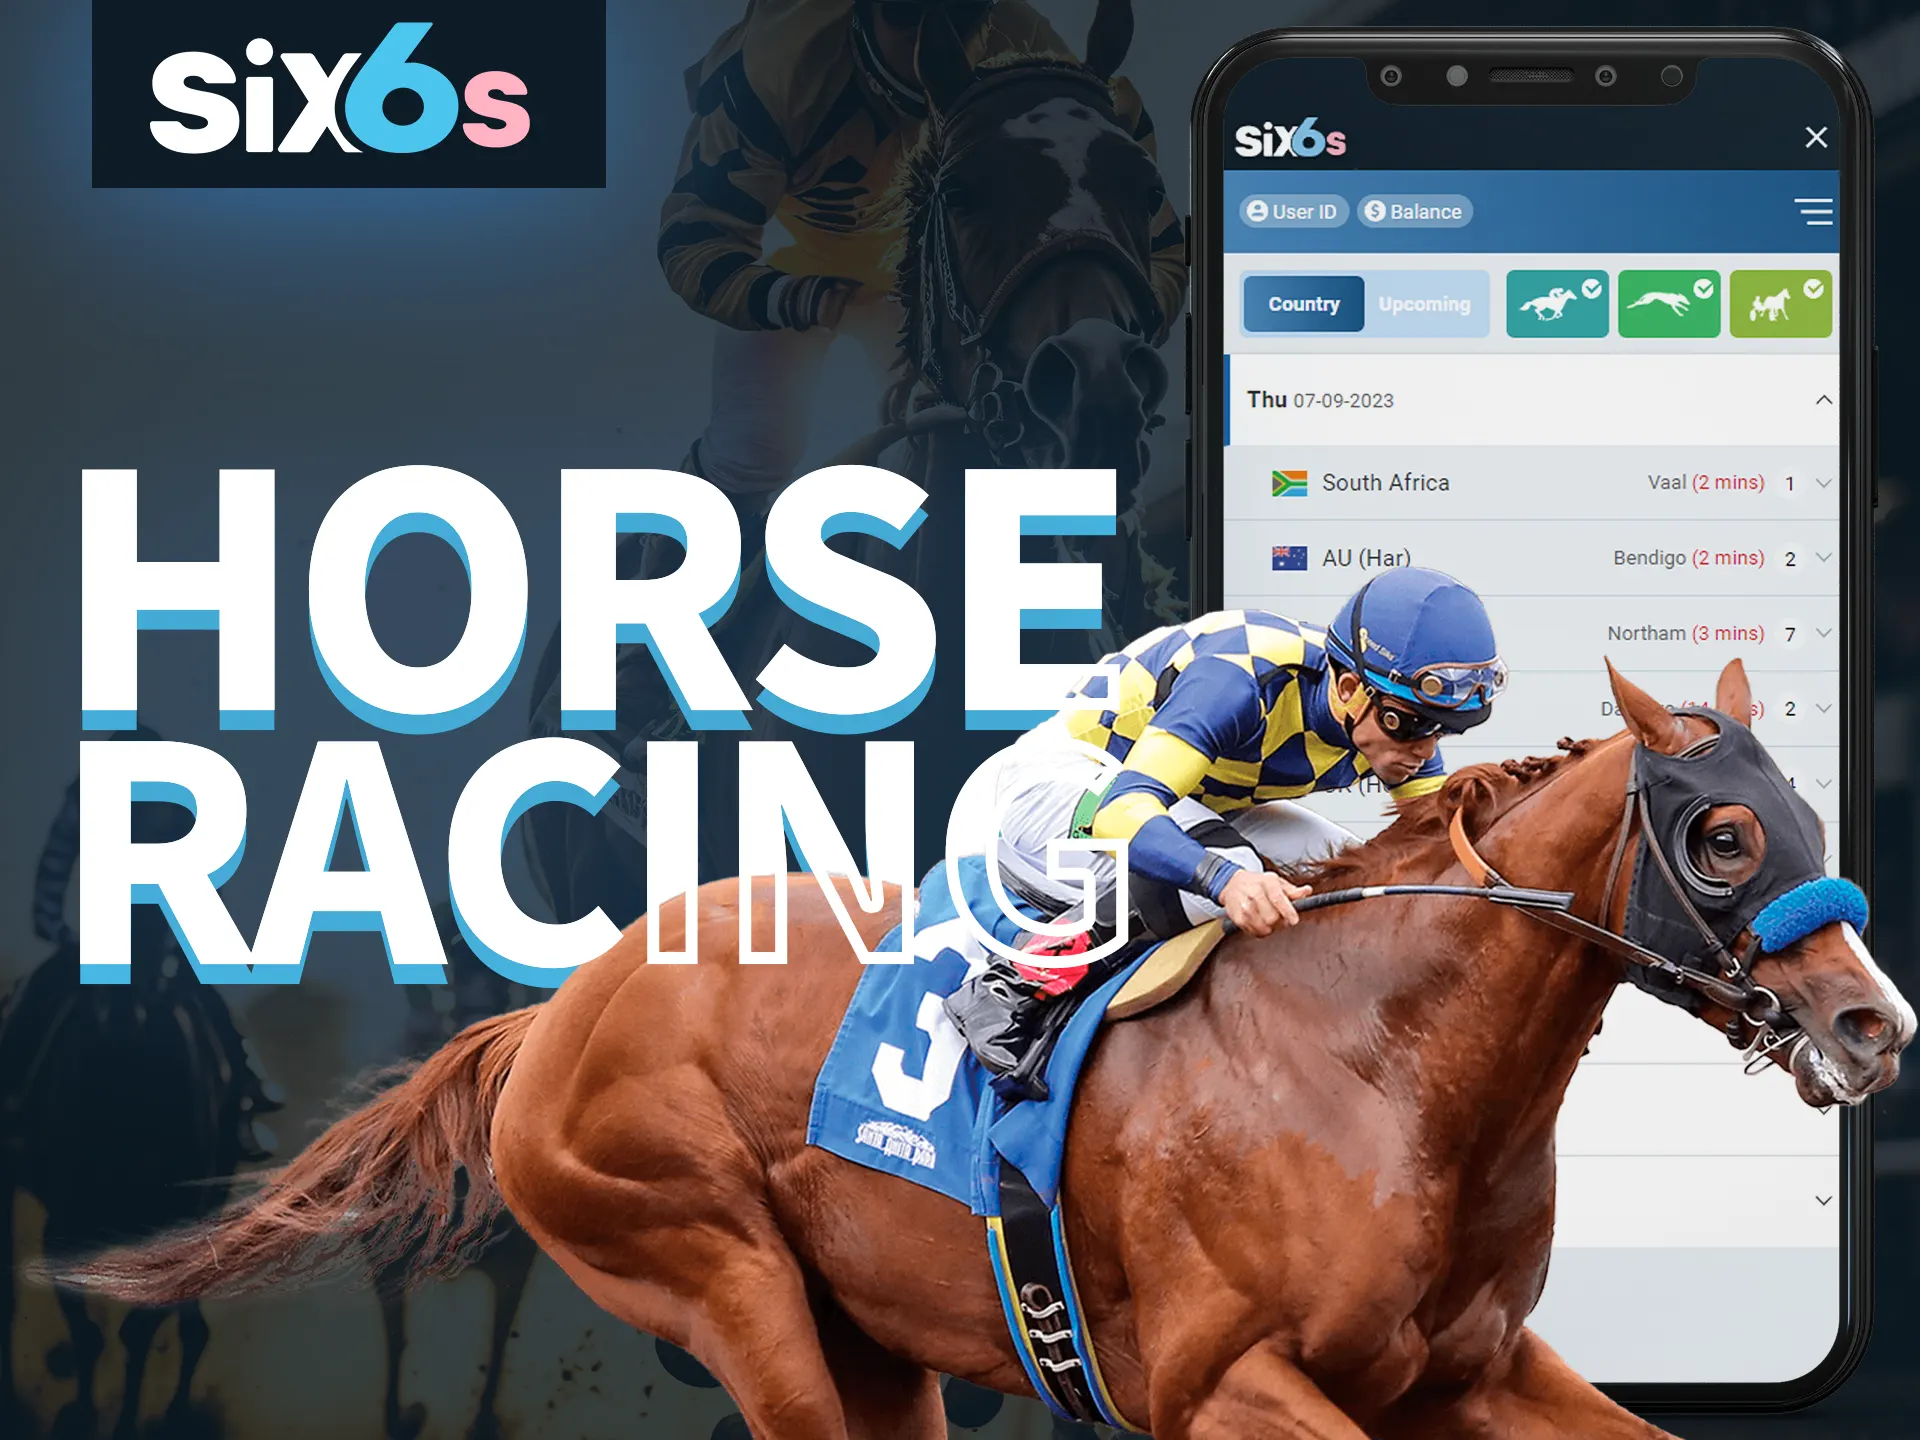 Bet on horse racing with Six6s.